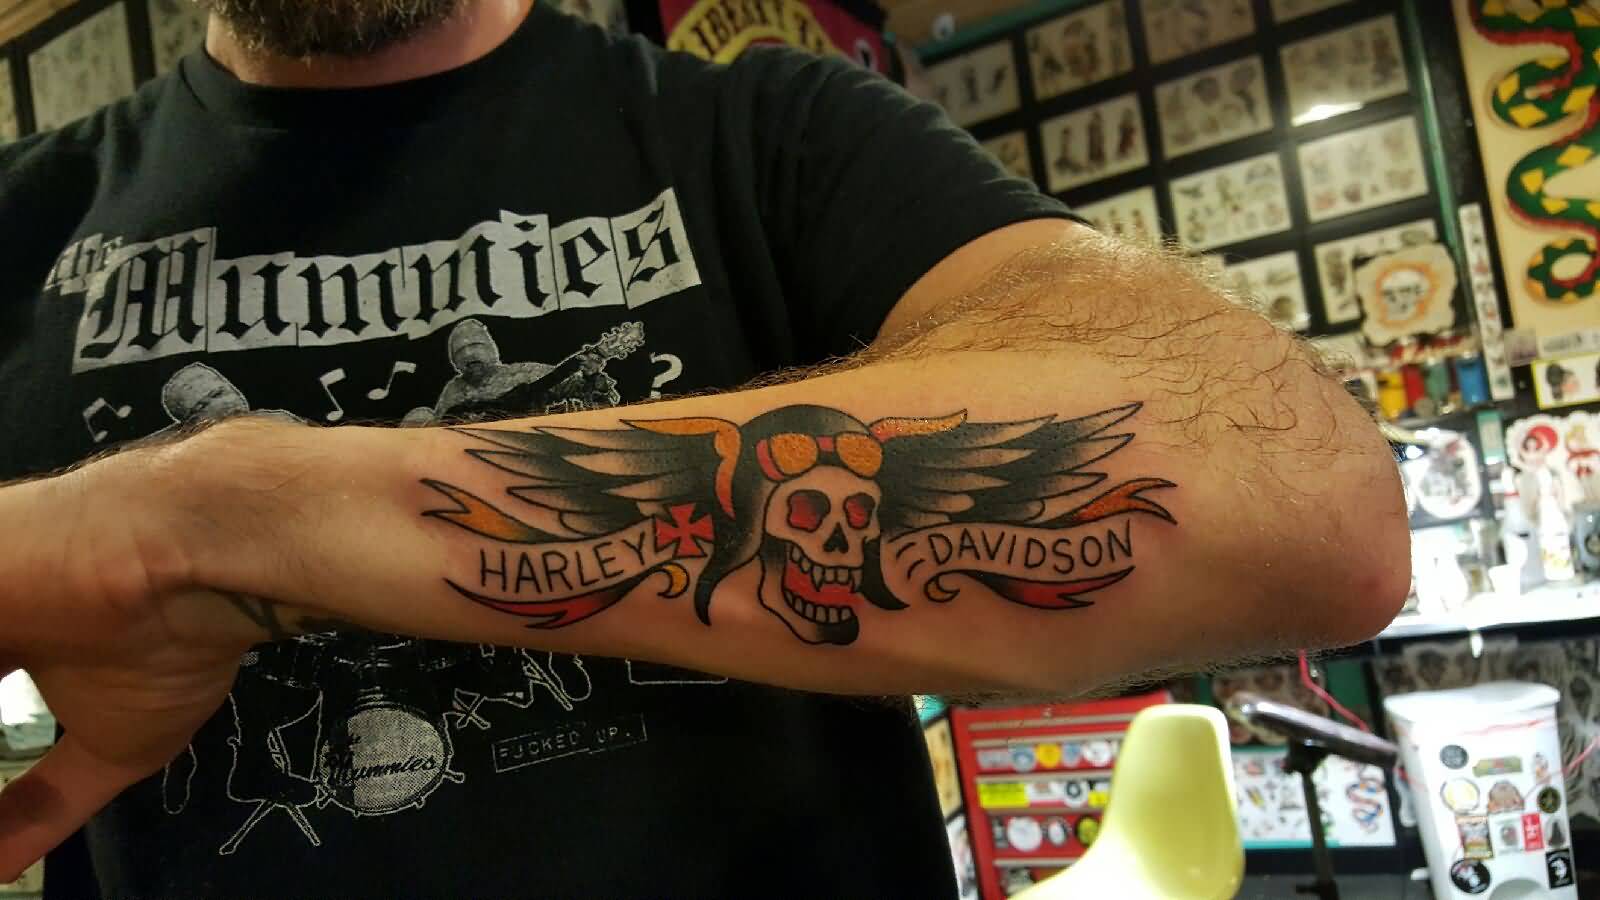 Traditional Winged Biker Skull And Harley Davidson Tattoo On Arm Sleeve